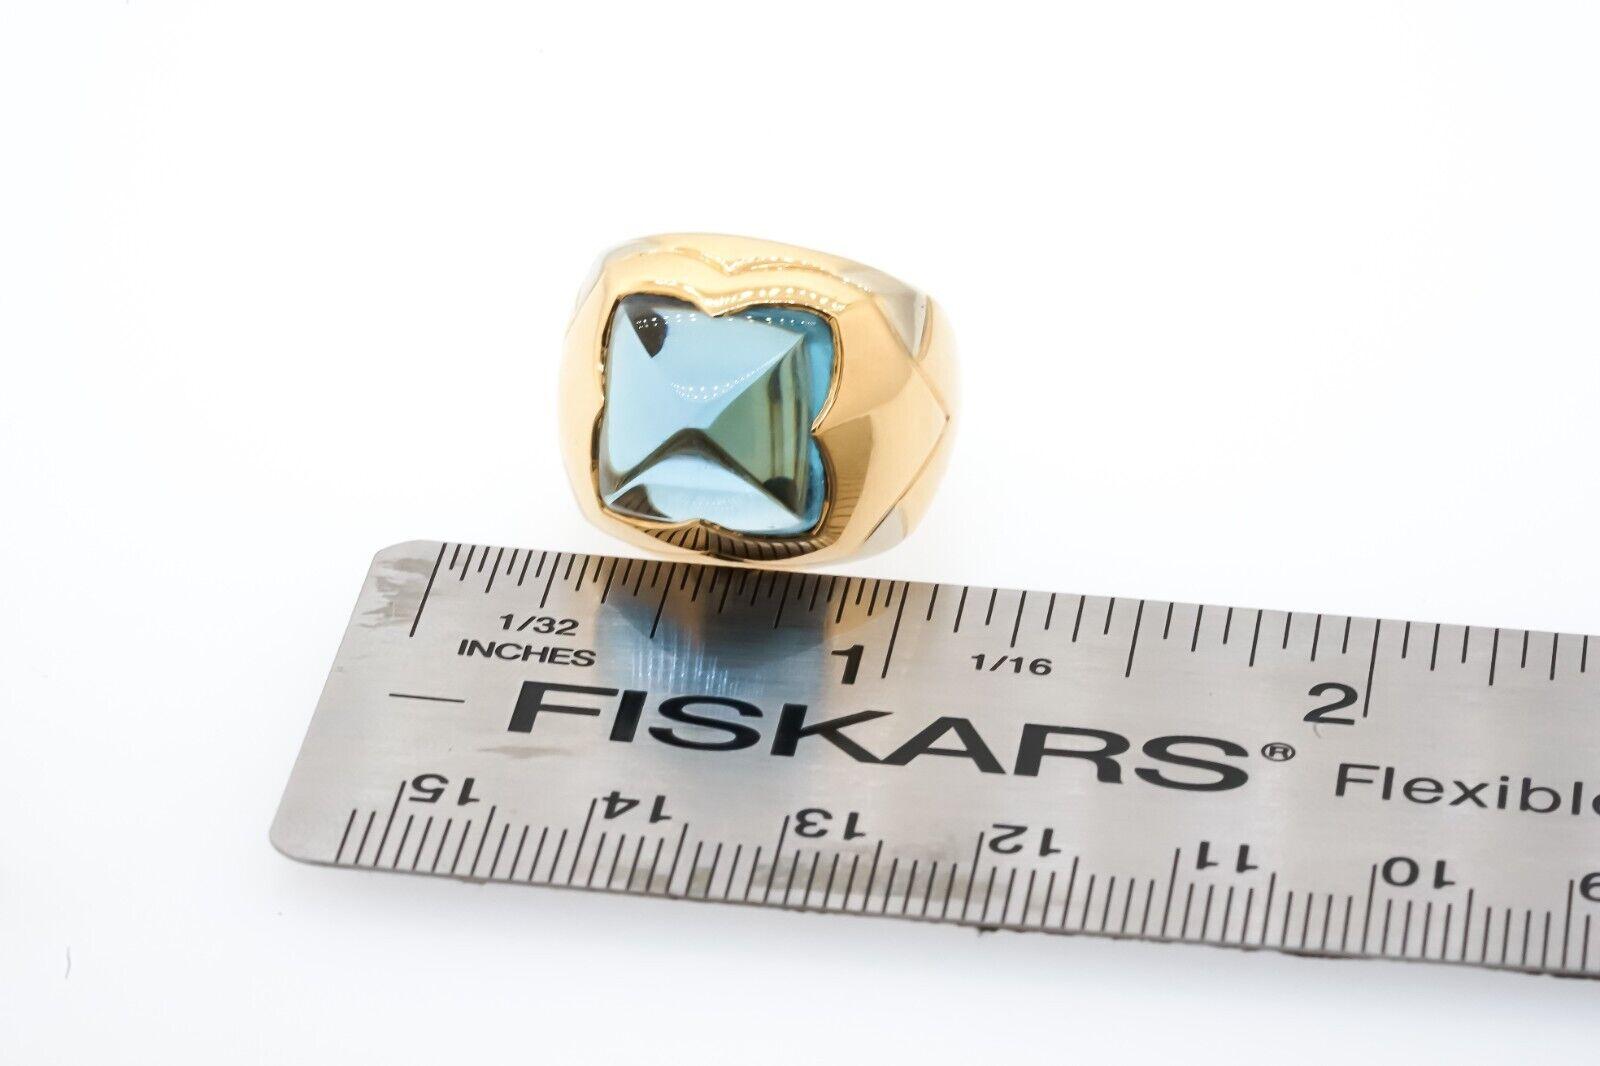 Bvlgari Italy 18k Gold & Topaz Pyramid Ring Vintage

Here is your chance to purchase a beautiful and highly collectible designer ring.  

STAMPED: 750 BVLGARI 
MEASURES:
Height: 0.4 Inches (10.2 mm)
Shank: 0.16 Inches (4.1 mm)
Width: 0.72 Inches